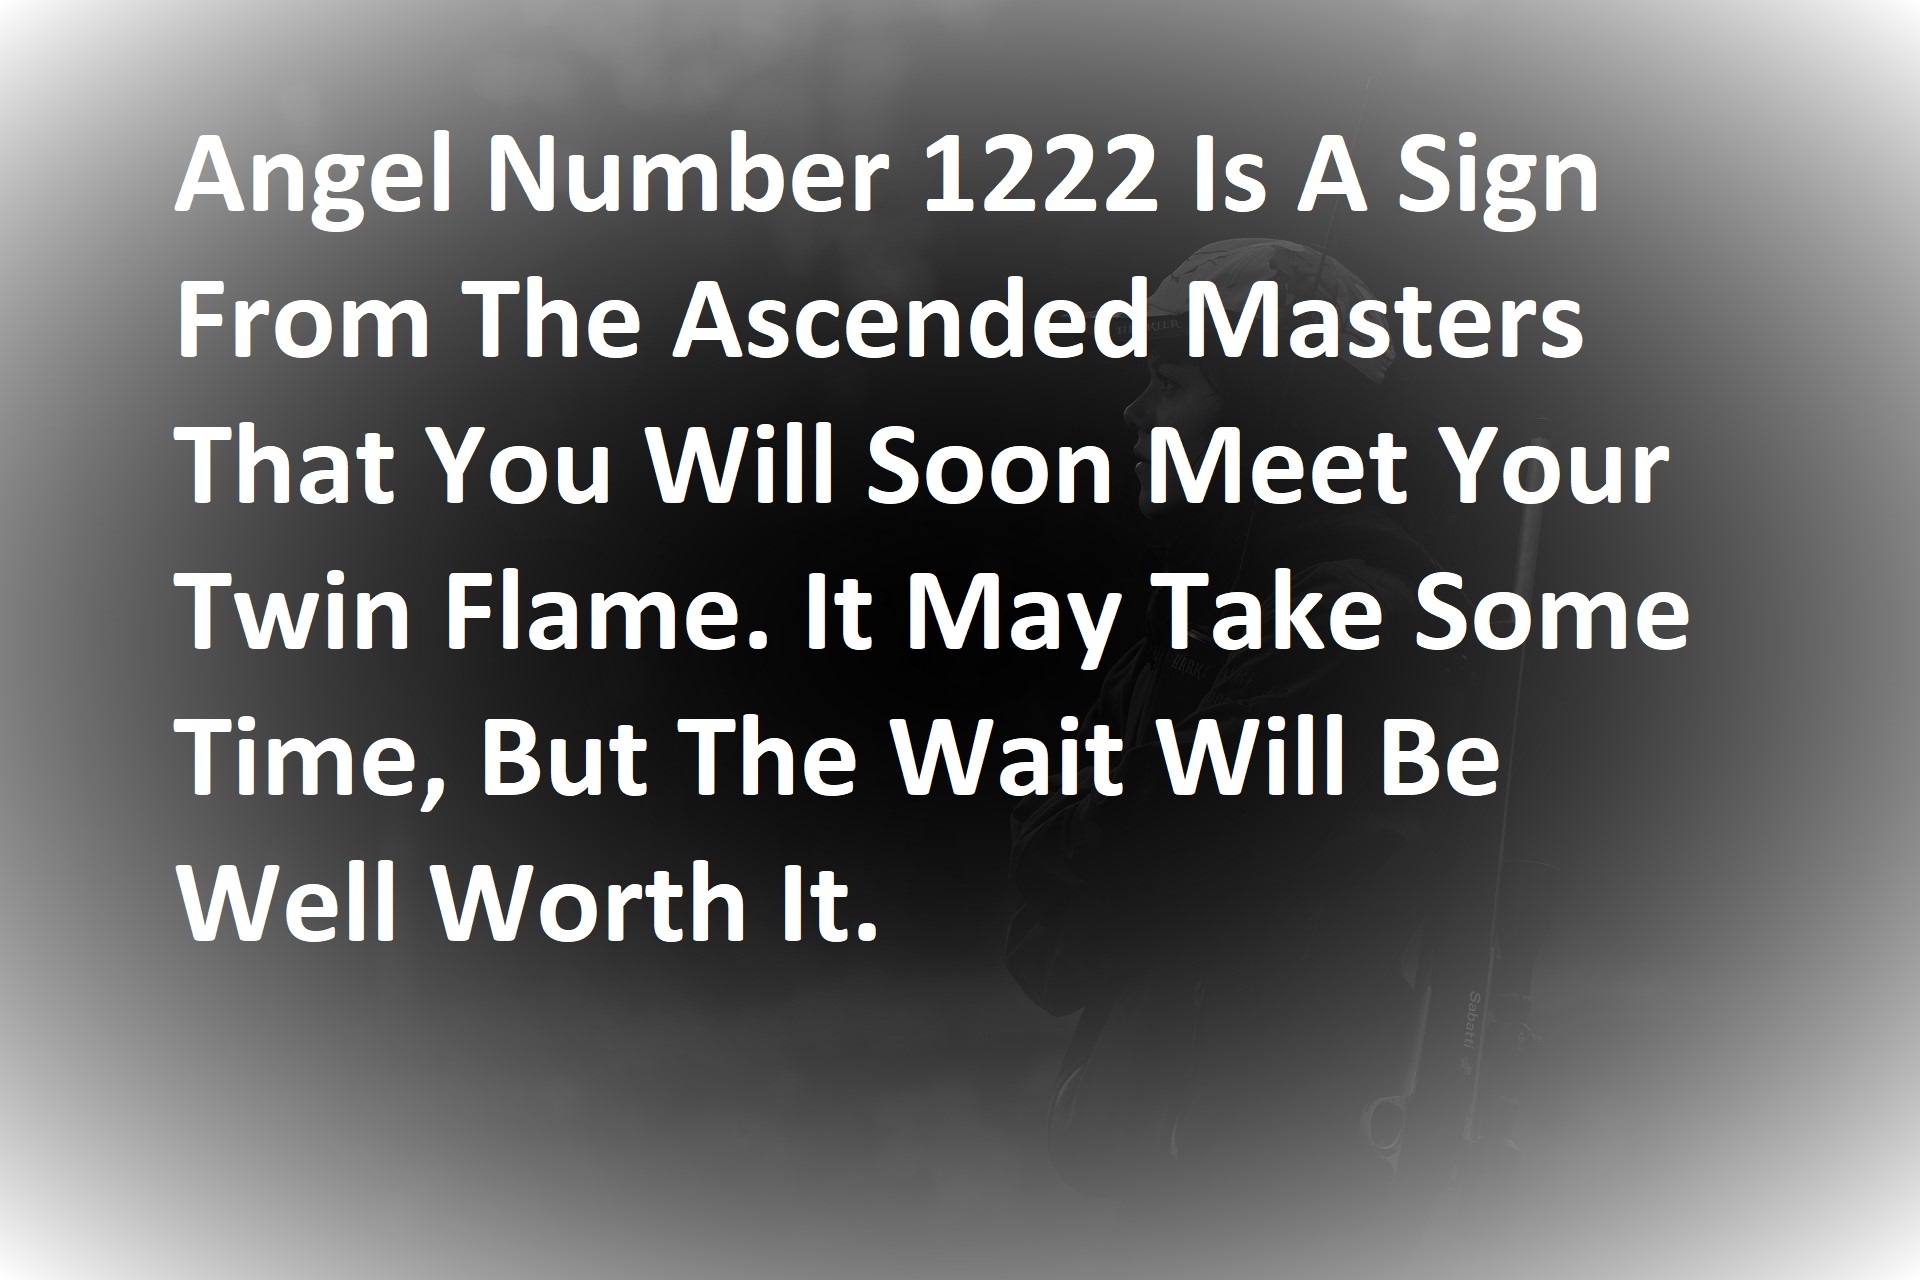 Angel Number 1222 Meaning Is A Sign Of New Beginnings And Positive Change